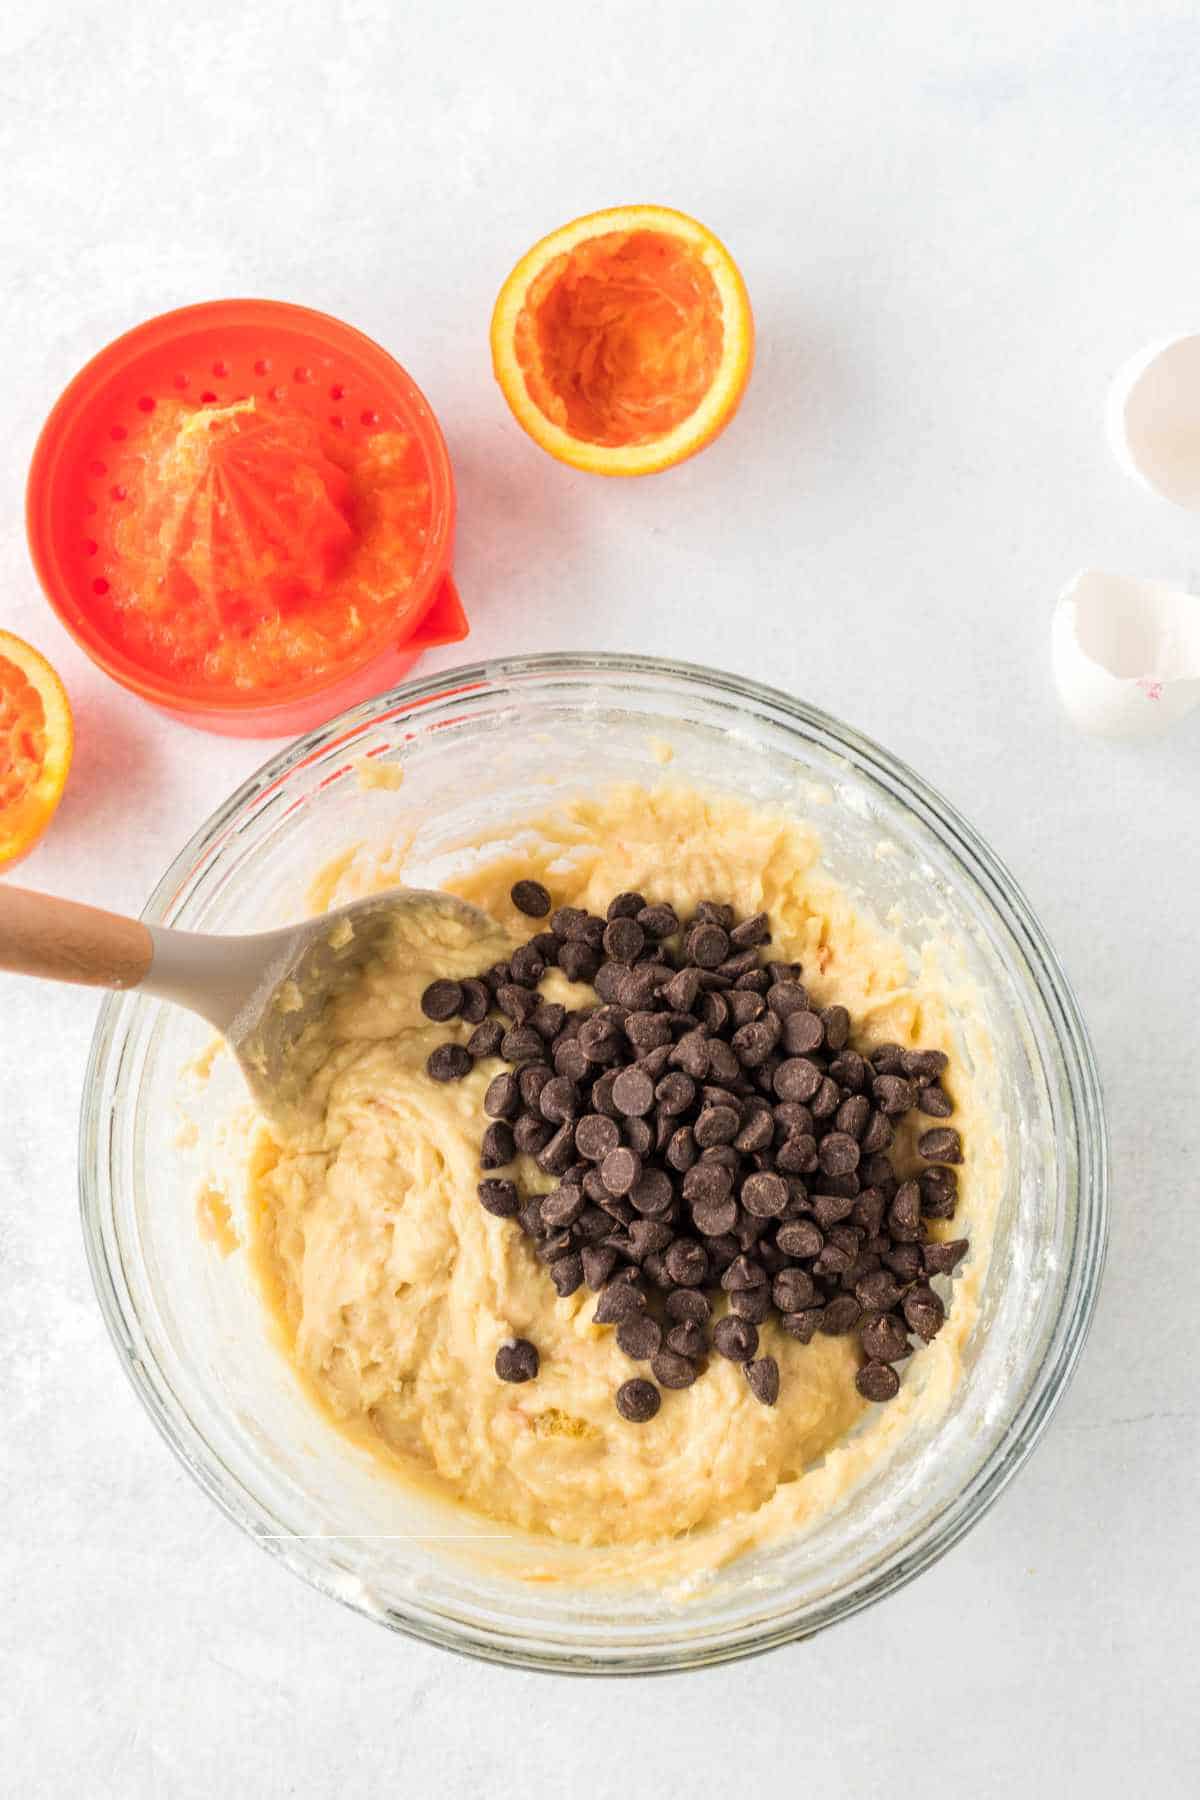 chocolate chips added to batter with orange juicer and orange nearby.